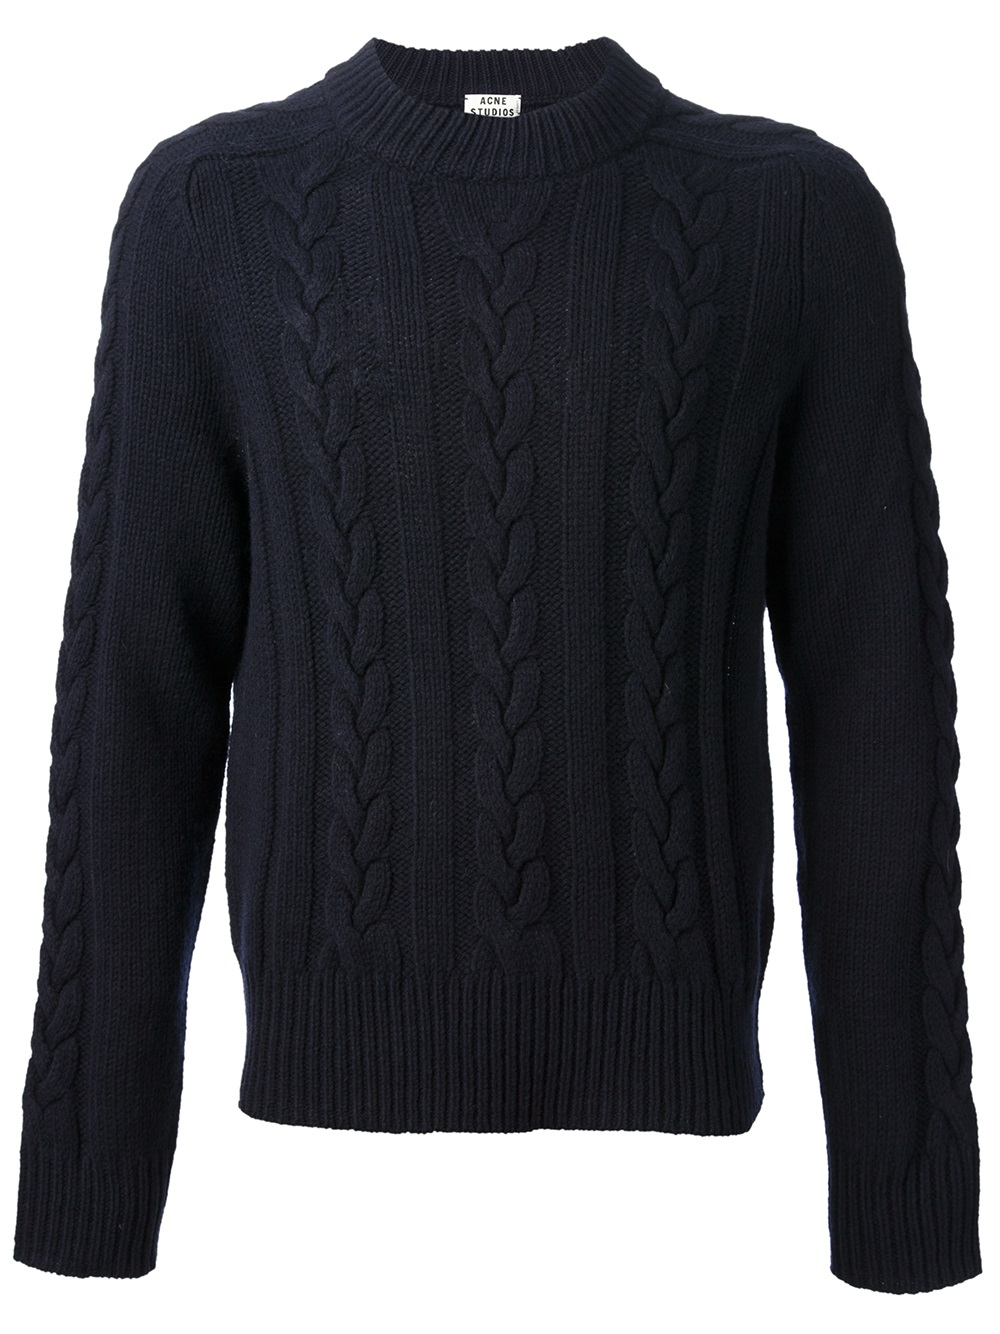 Acne Studios Brent Cable Knit Sweater in Blue (Black) for Men - Lyst